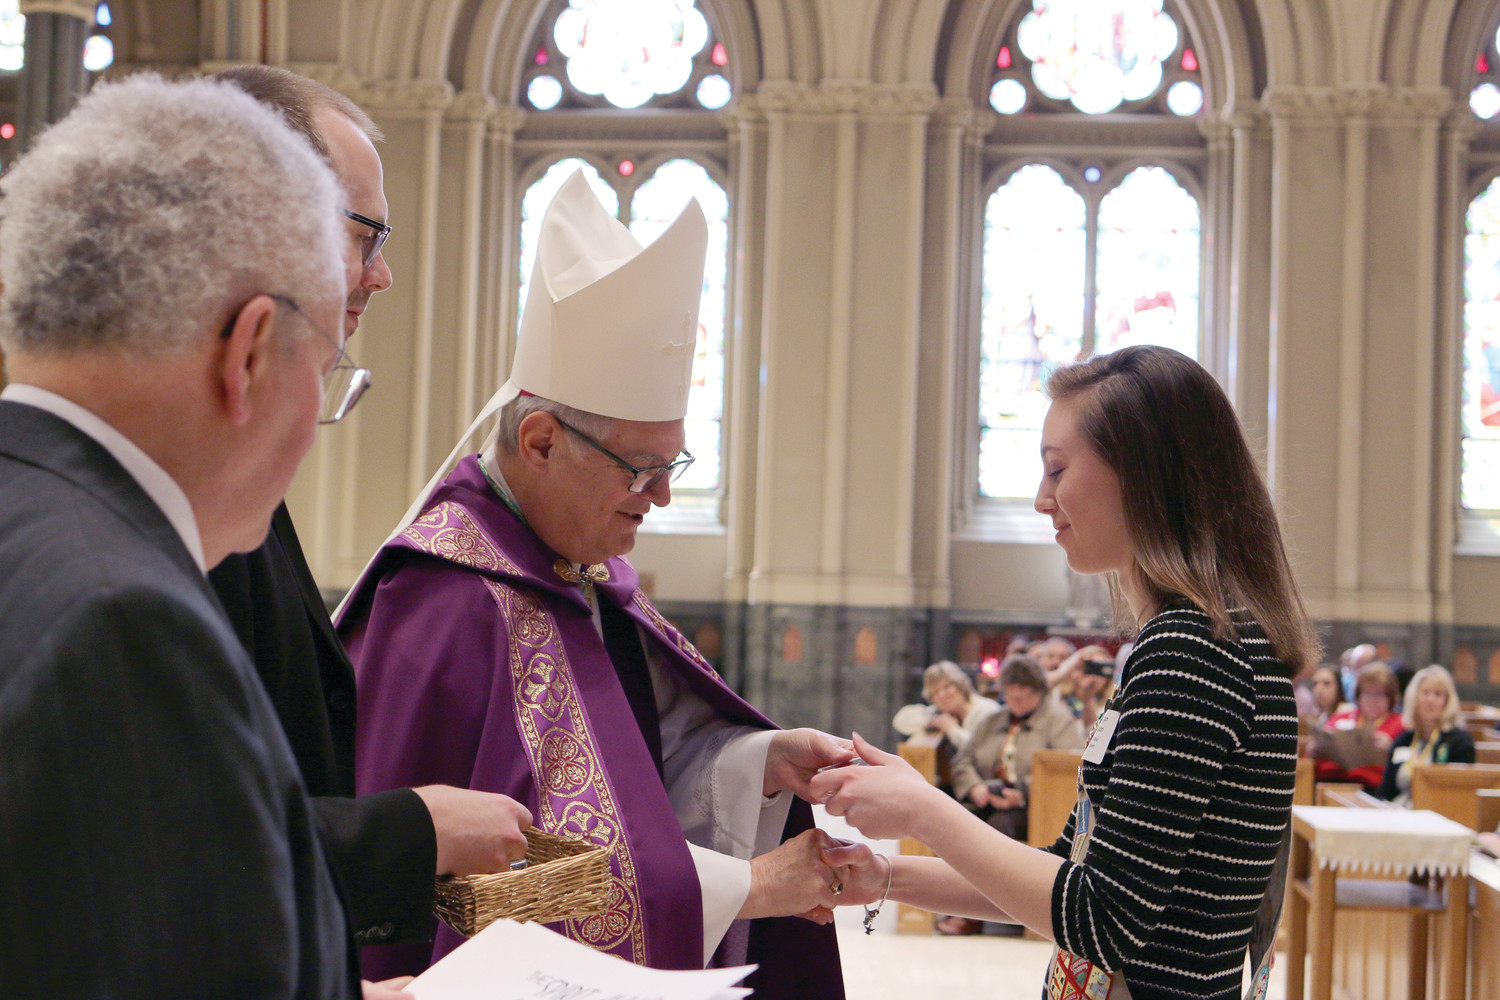 Bishop Thomas J. Tobin presents awards at the Diocesan Catholic Youth Ministry and Scout Awards celebration on Sunday, March 11, at the Cathedral of Saints Peter and Paul in Providence. Pictured: Morgan Watson, St. John Vianney Church, honored with a Spirit Alive Medal and Pillars of Faith Award